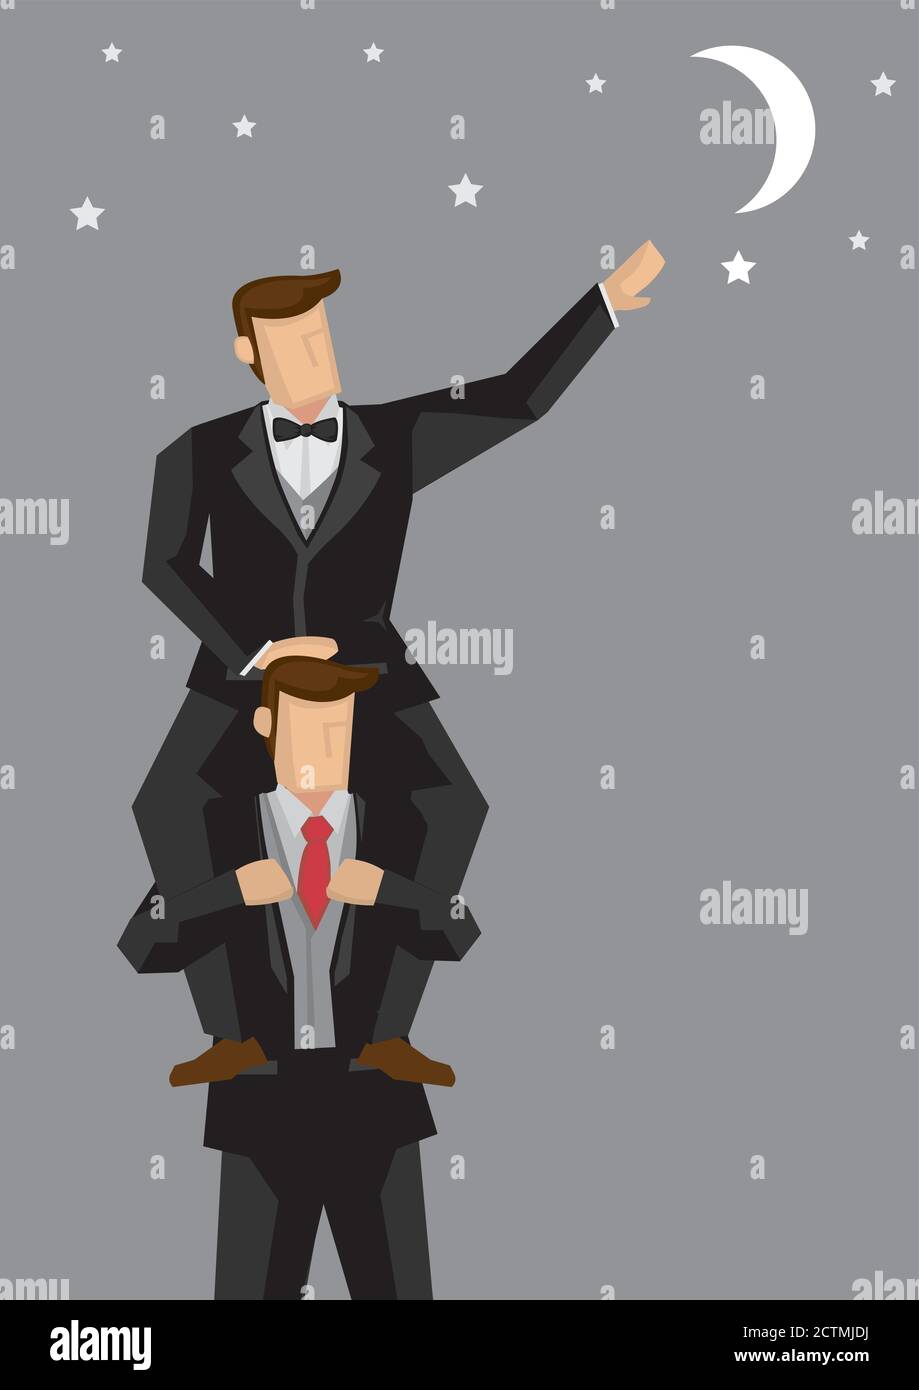 Cartoon man sitting on shoulders of his partner and reaching for the crescent moon in the sky. Vector illustration for aiming high and working with a Stock Vector